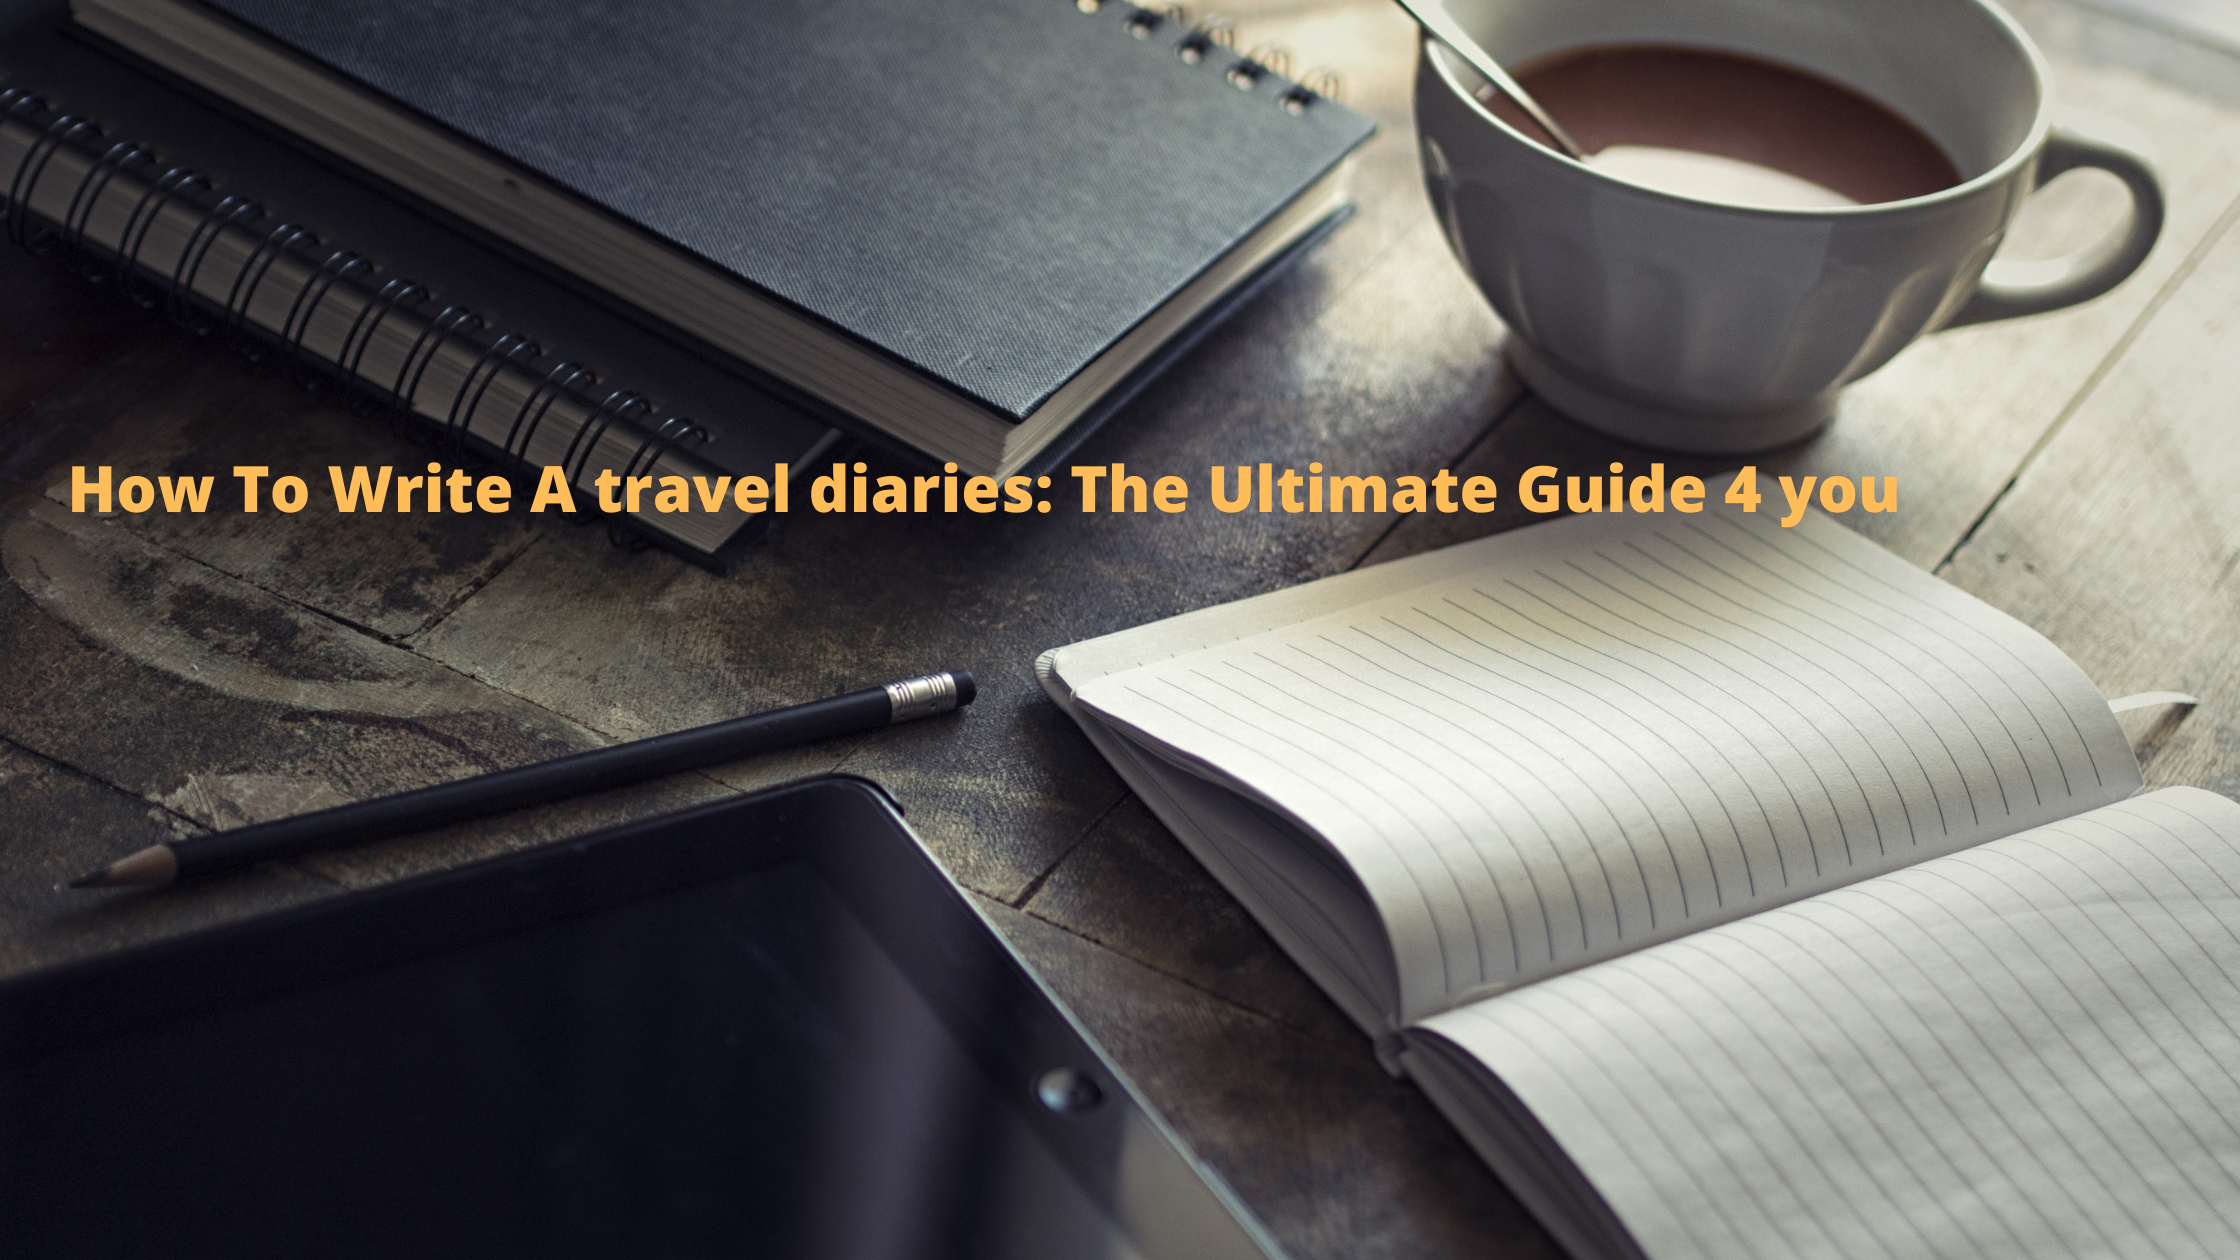 How To Write A travel diaries : The Ultimate Guide 4 you